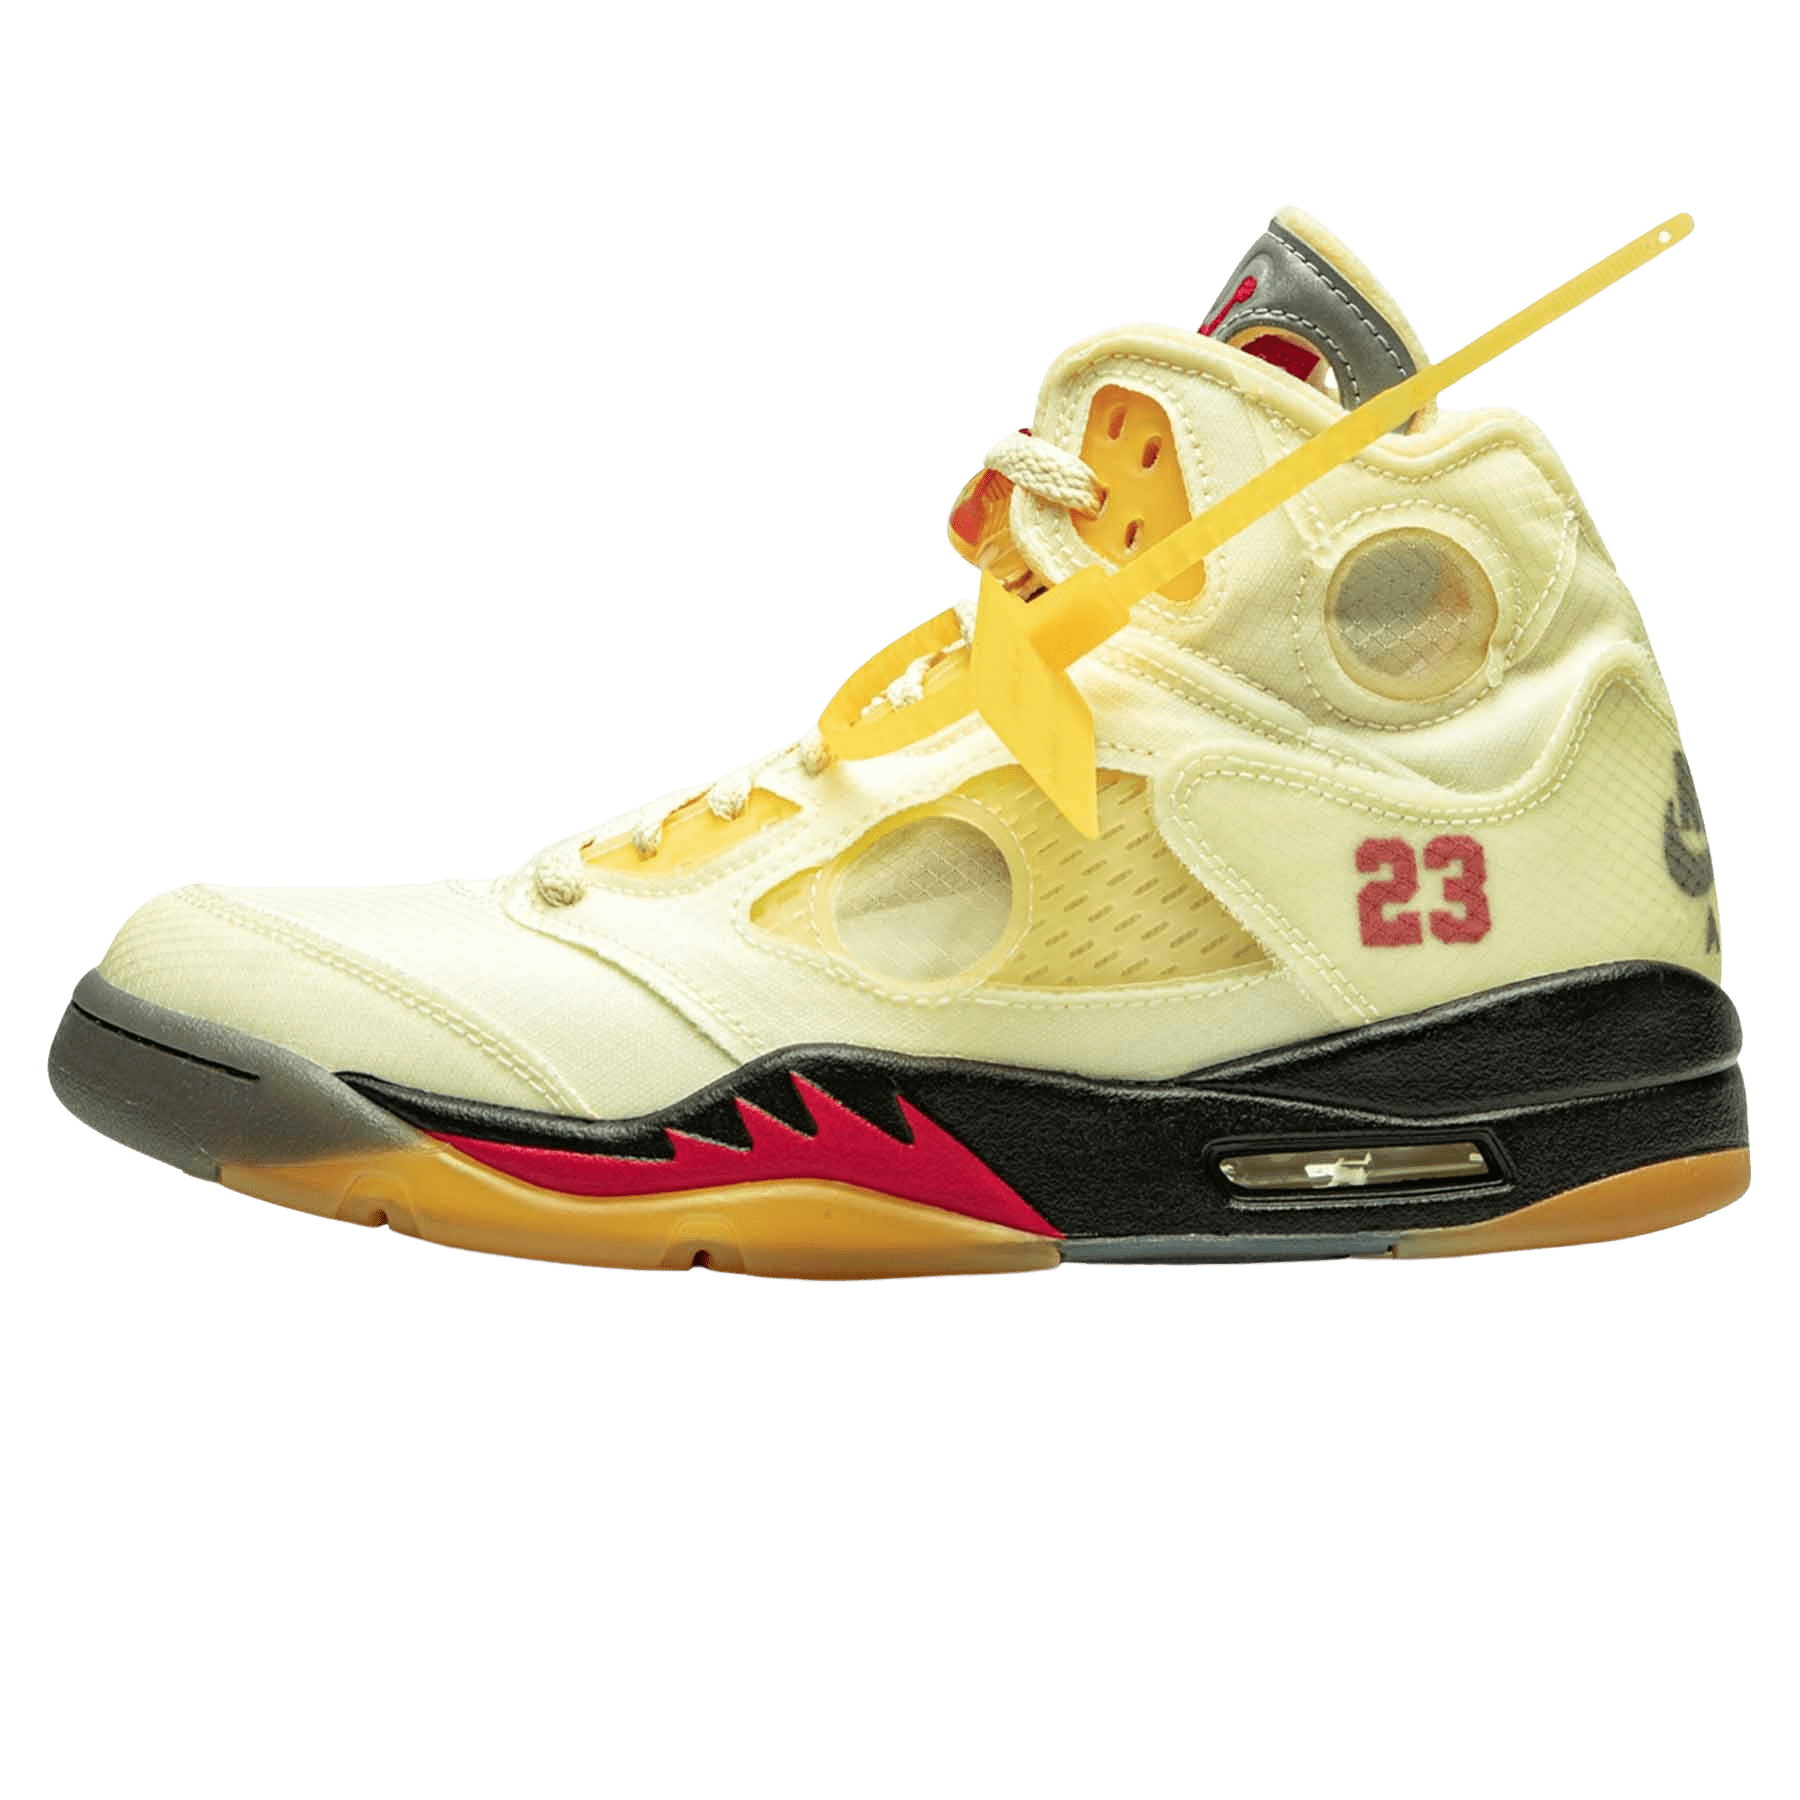 how many jordan 5 what the were made